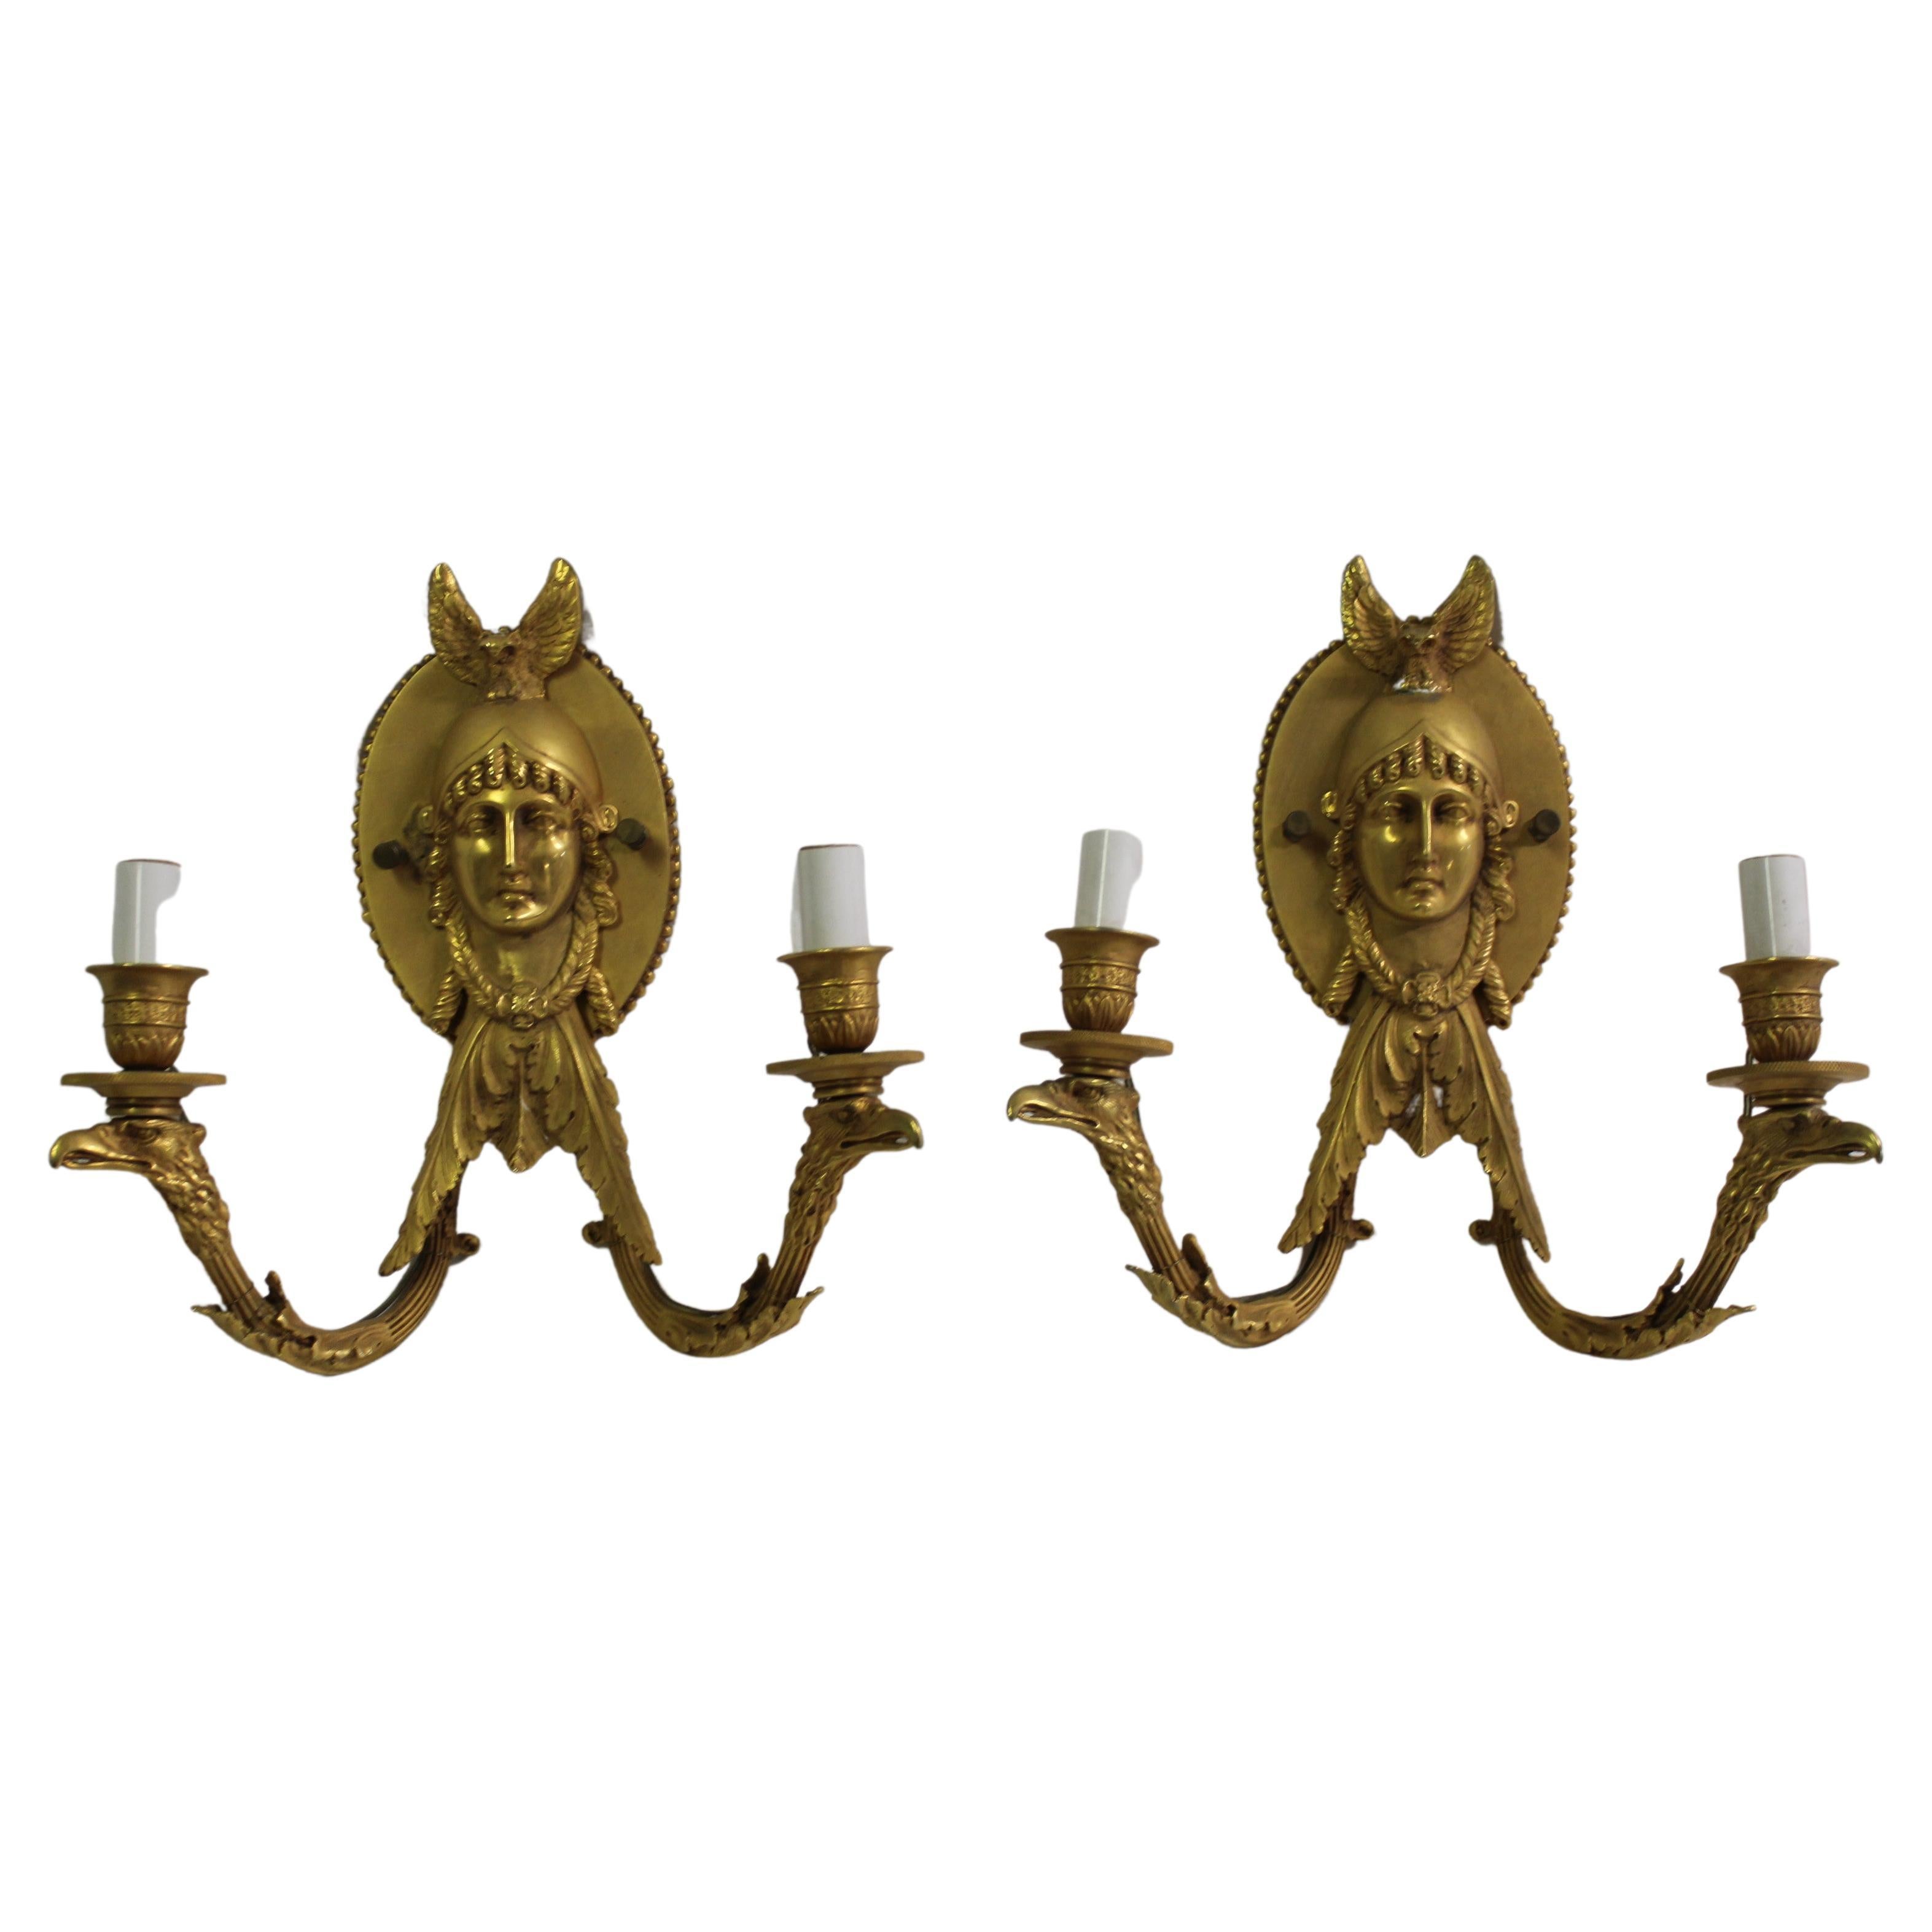 Empire Lady Face Sconces After Empire Dore' Gold Finish